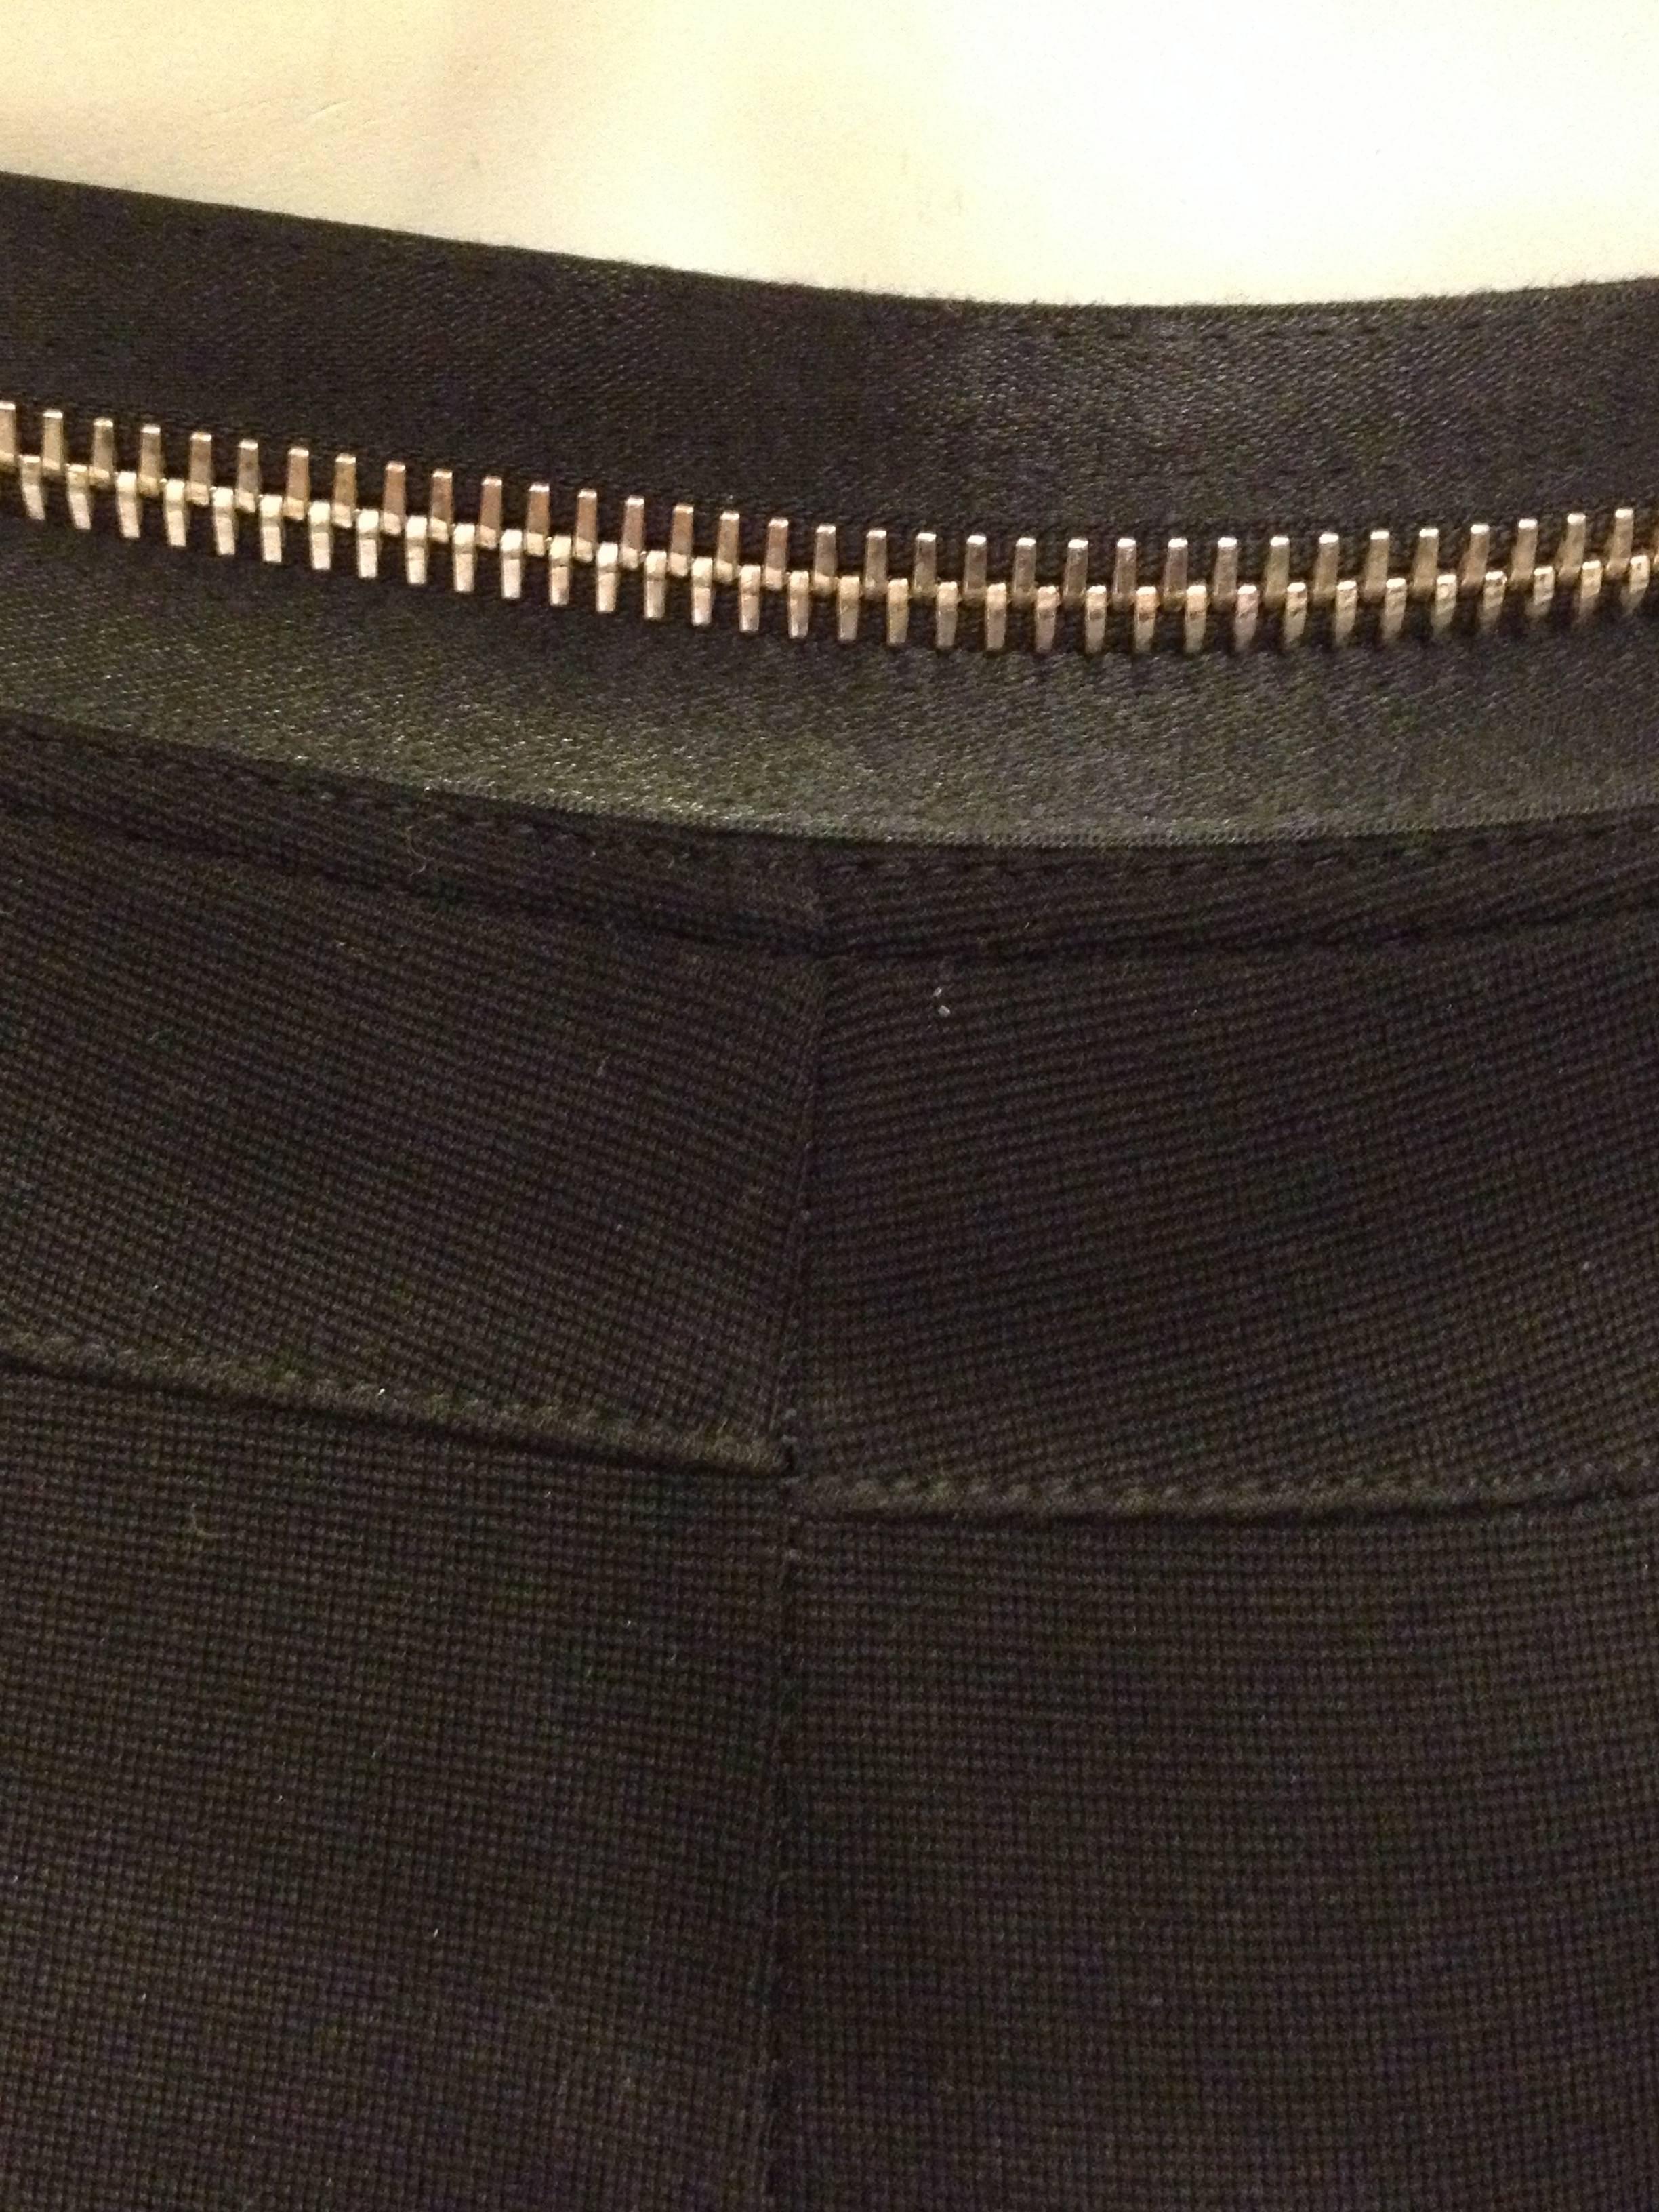 Givenchy Black Stretch Pants with Gold Zipper Waist 3